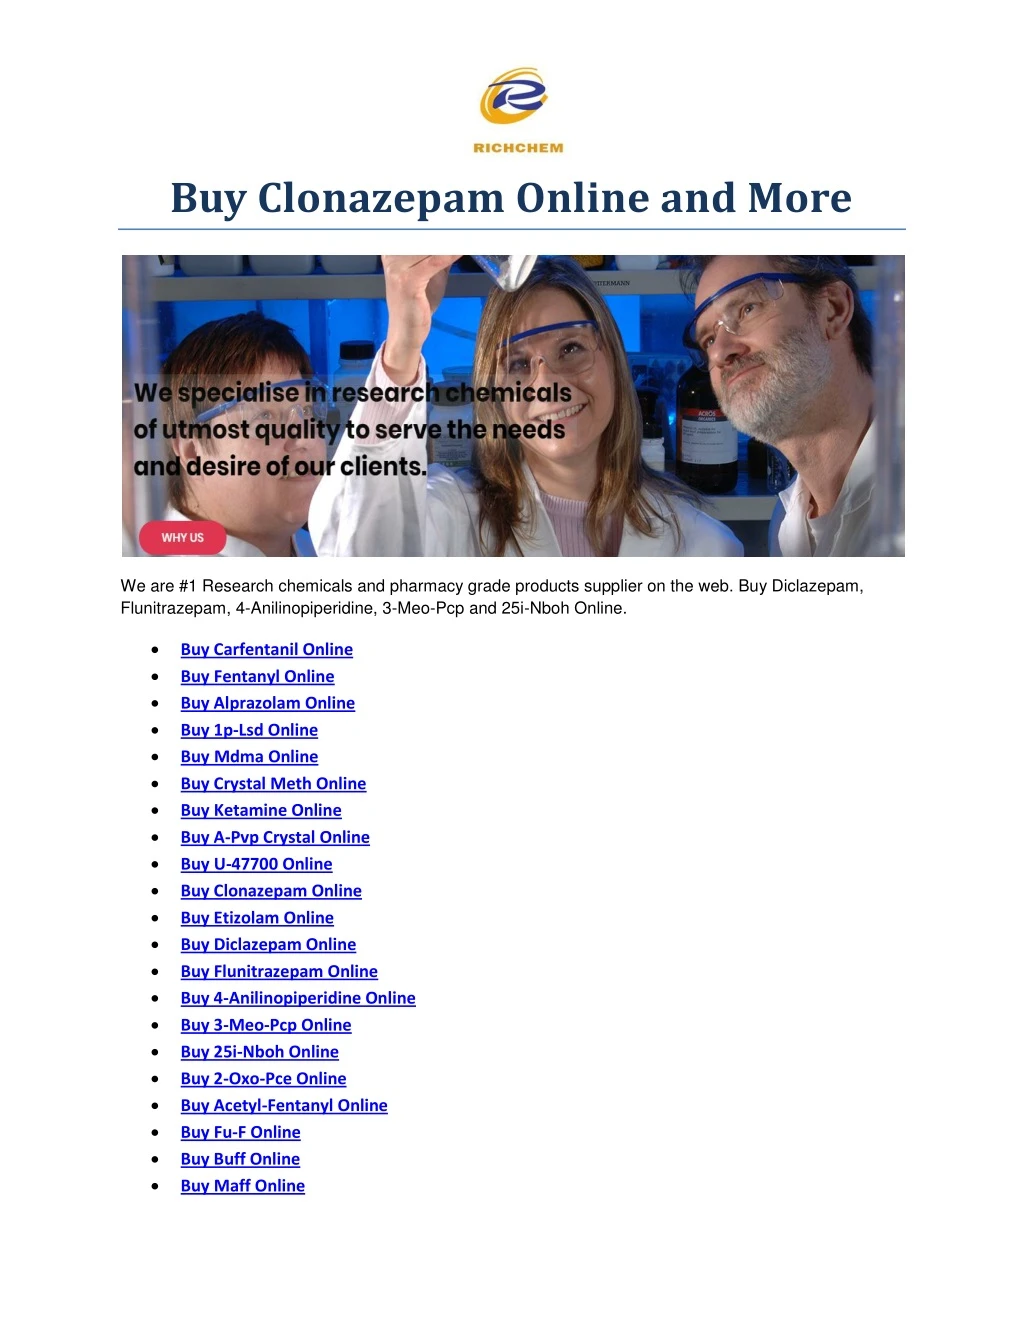 buy clonazepam online and more